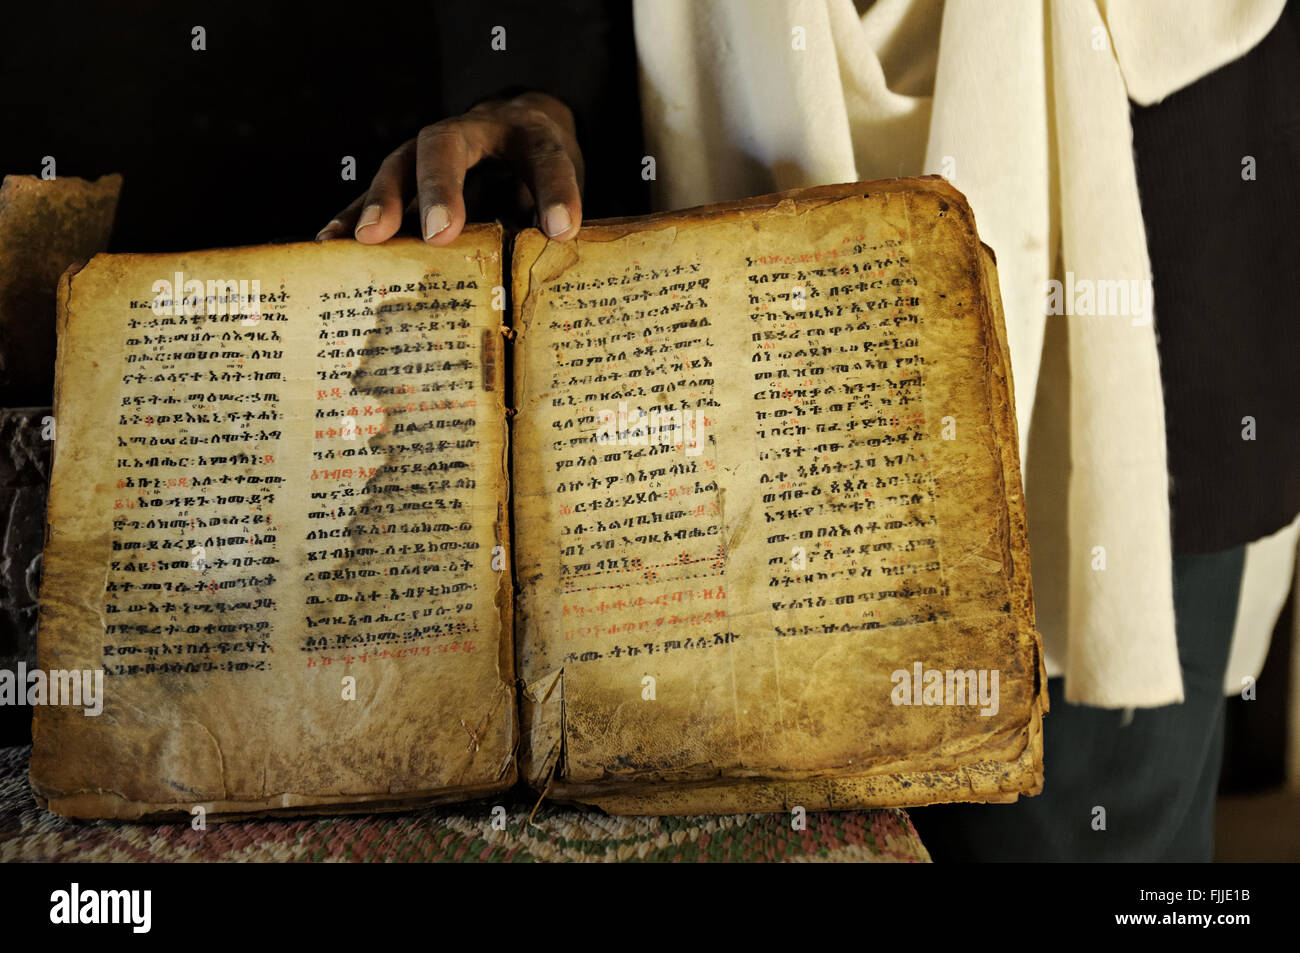 Orthodox priest showing an ancient goatskin manuscript found on the site of Yeha, Tigray Region, Ethiopia Stock Photo